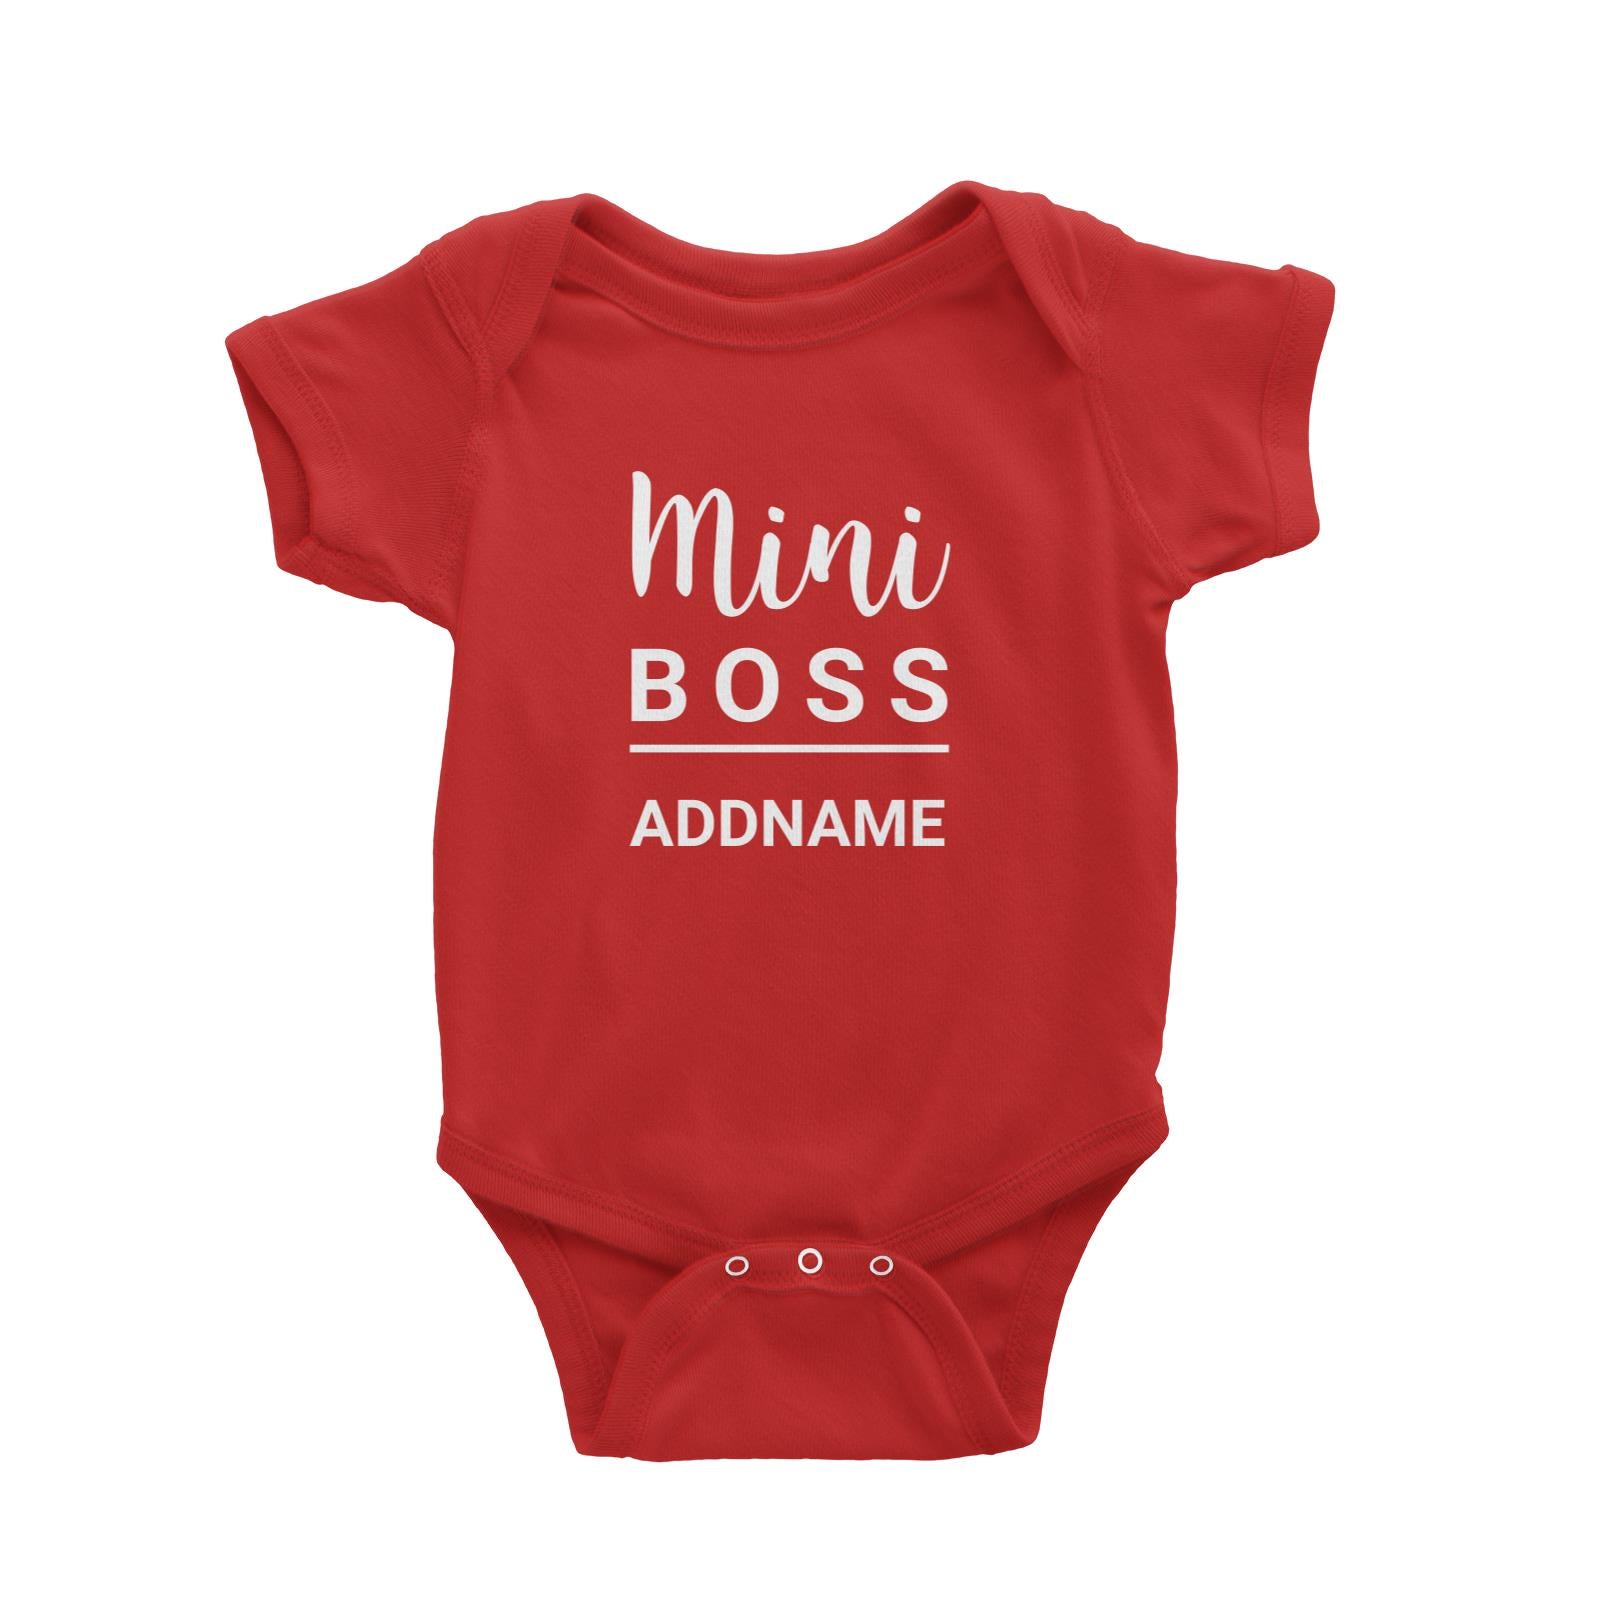 Mini Boss Addname Baby Romper  Matching Family Personalizable Designs